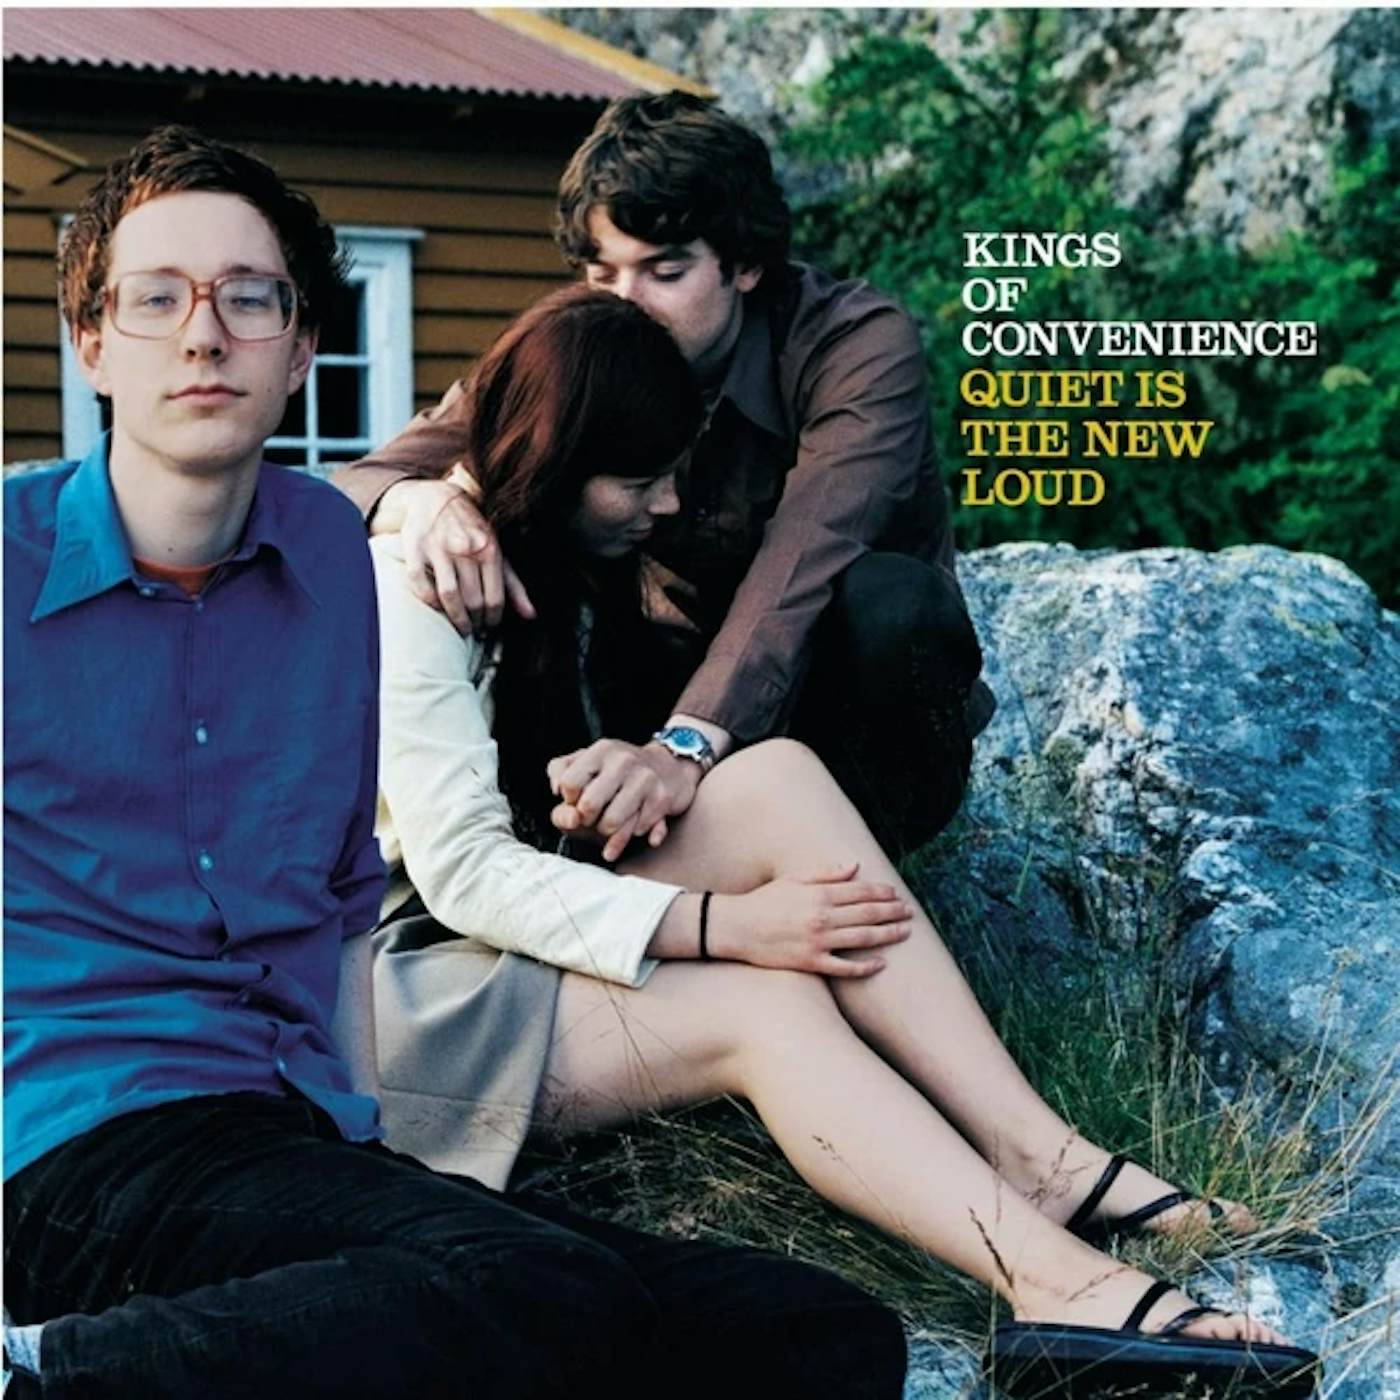 Kings of Convenience Quiet Is The New Loud Vinyl Record